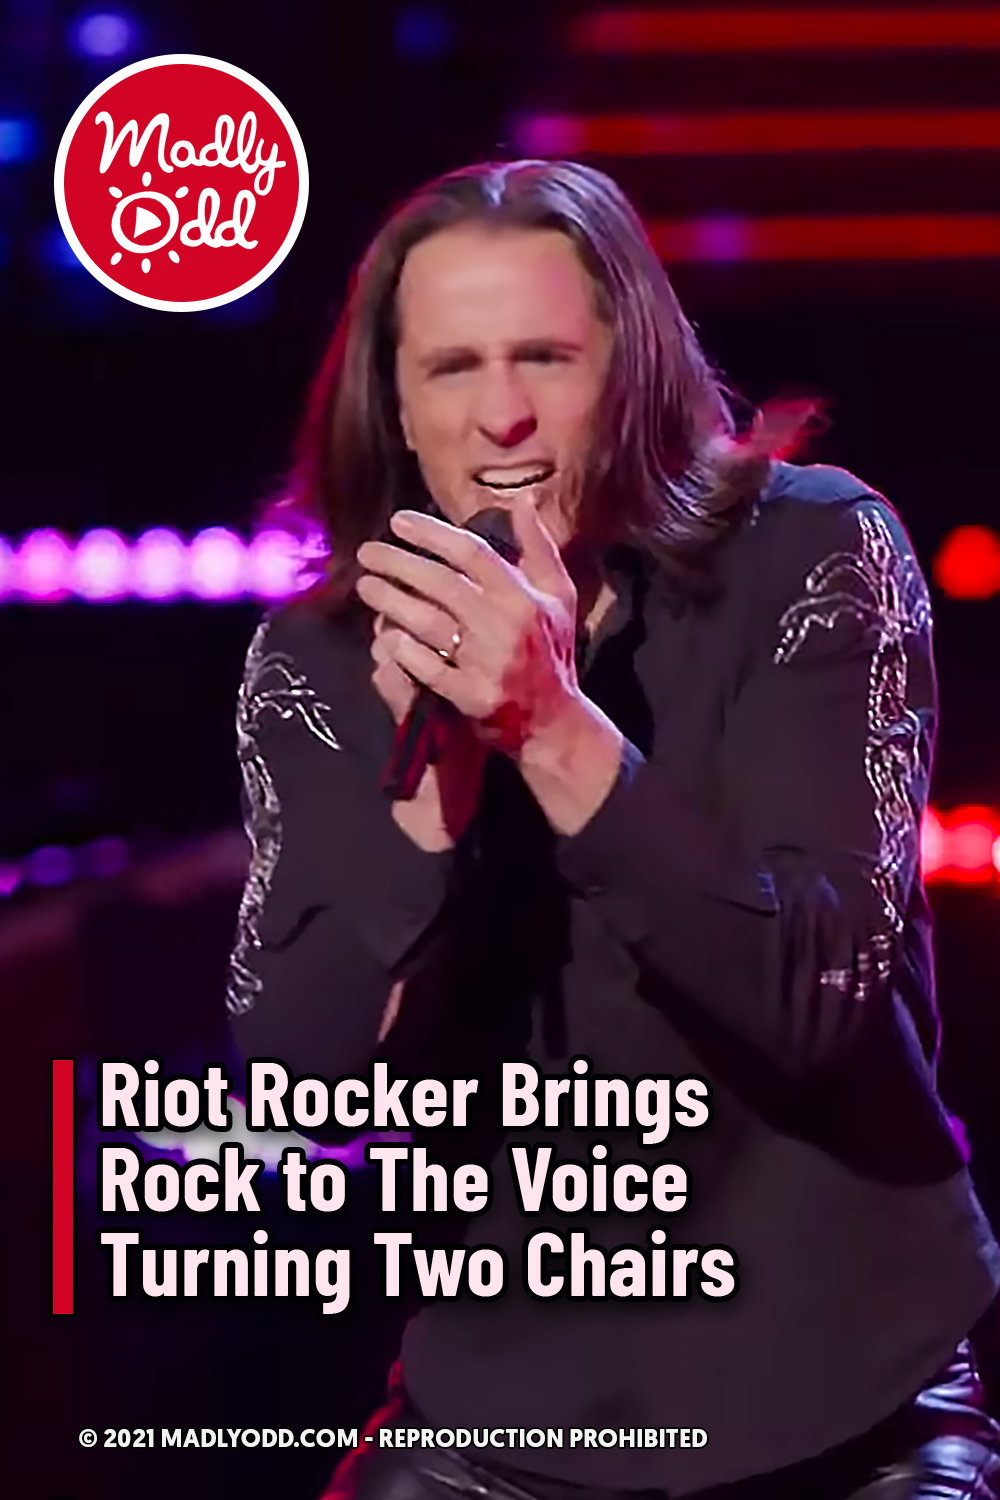 Riot Rocker Brings Rock to The Voice Turning Two Chairs